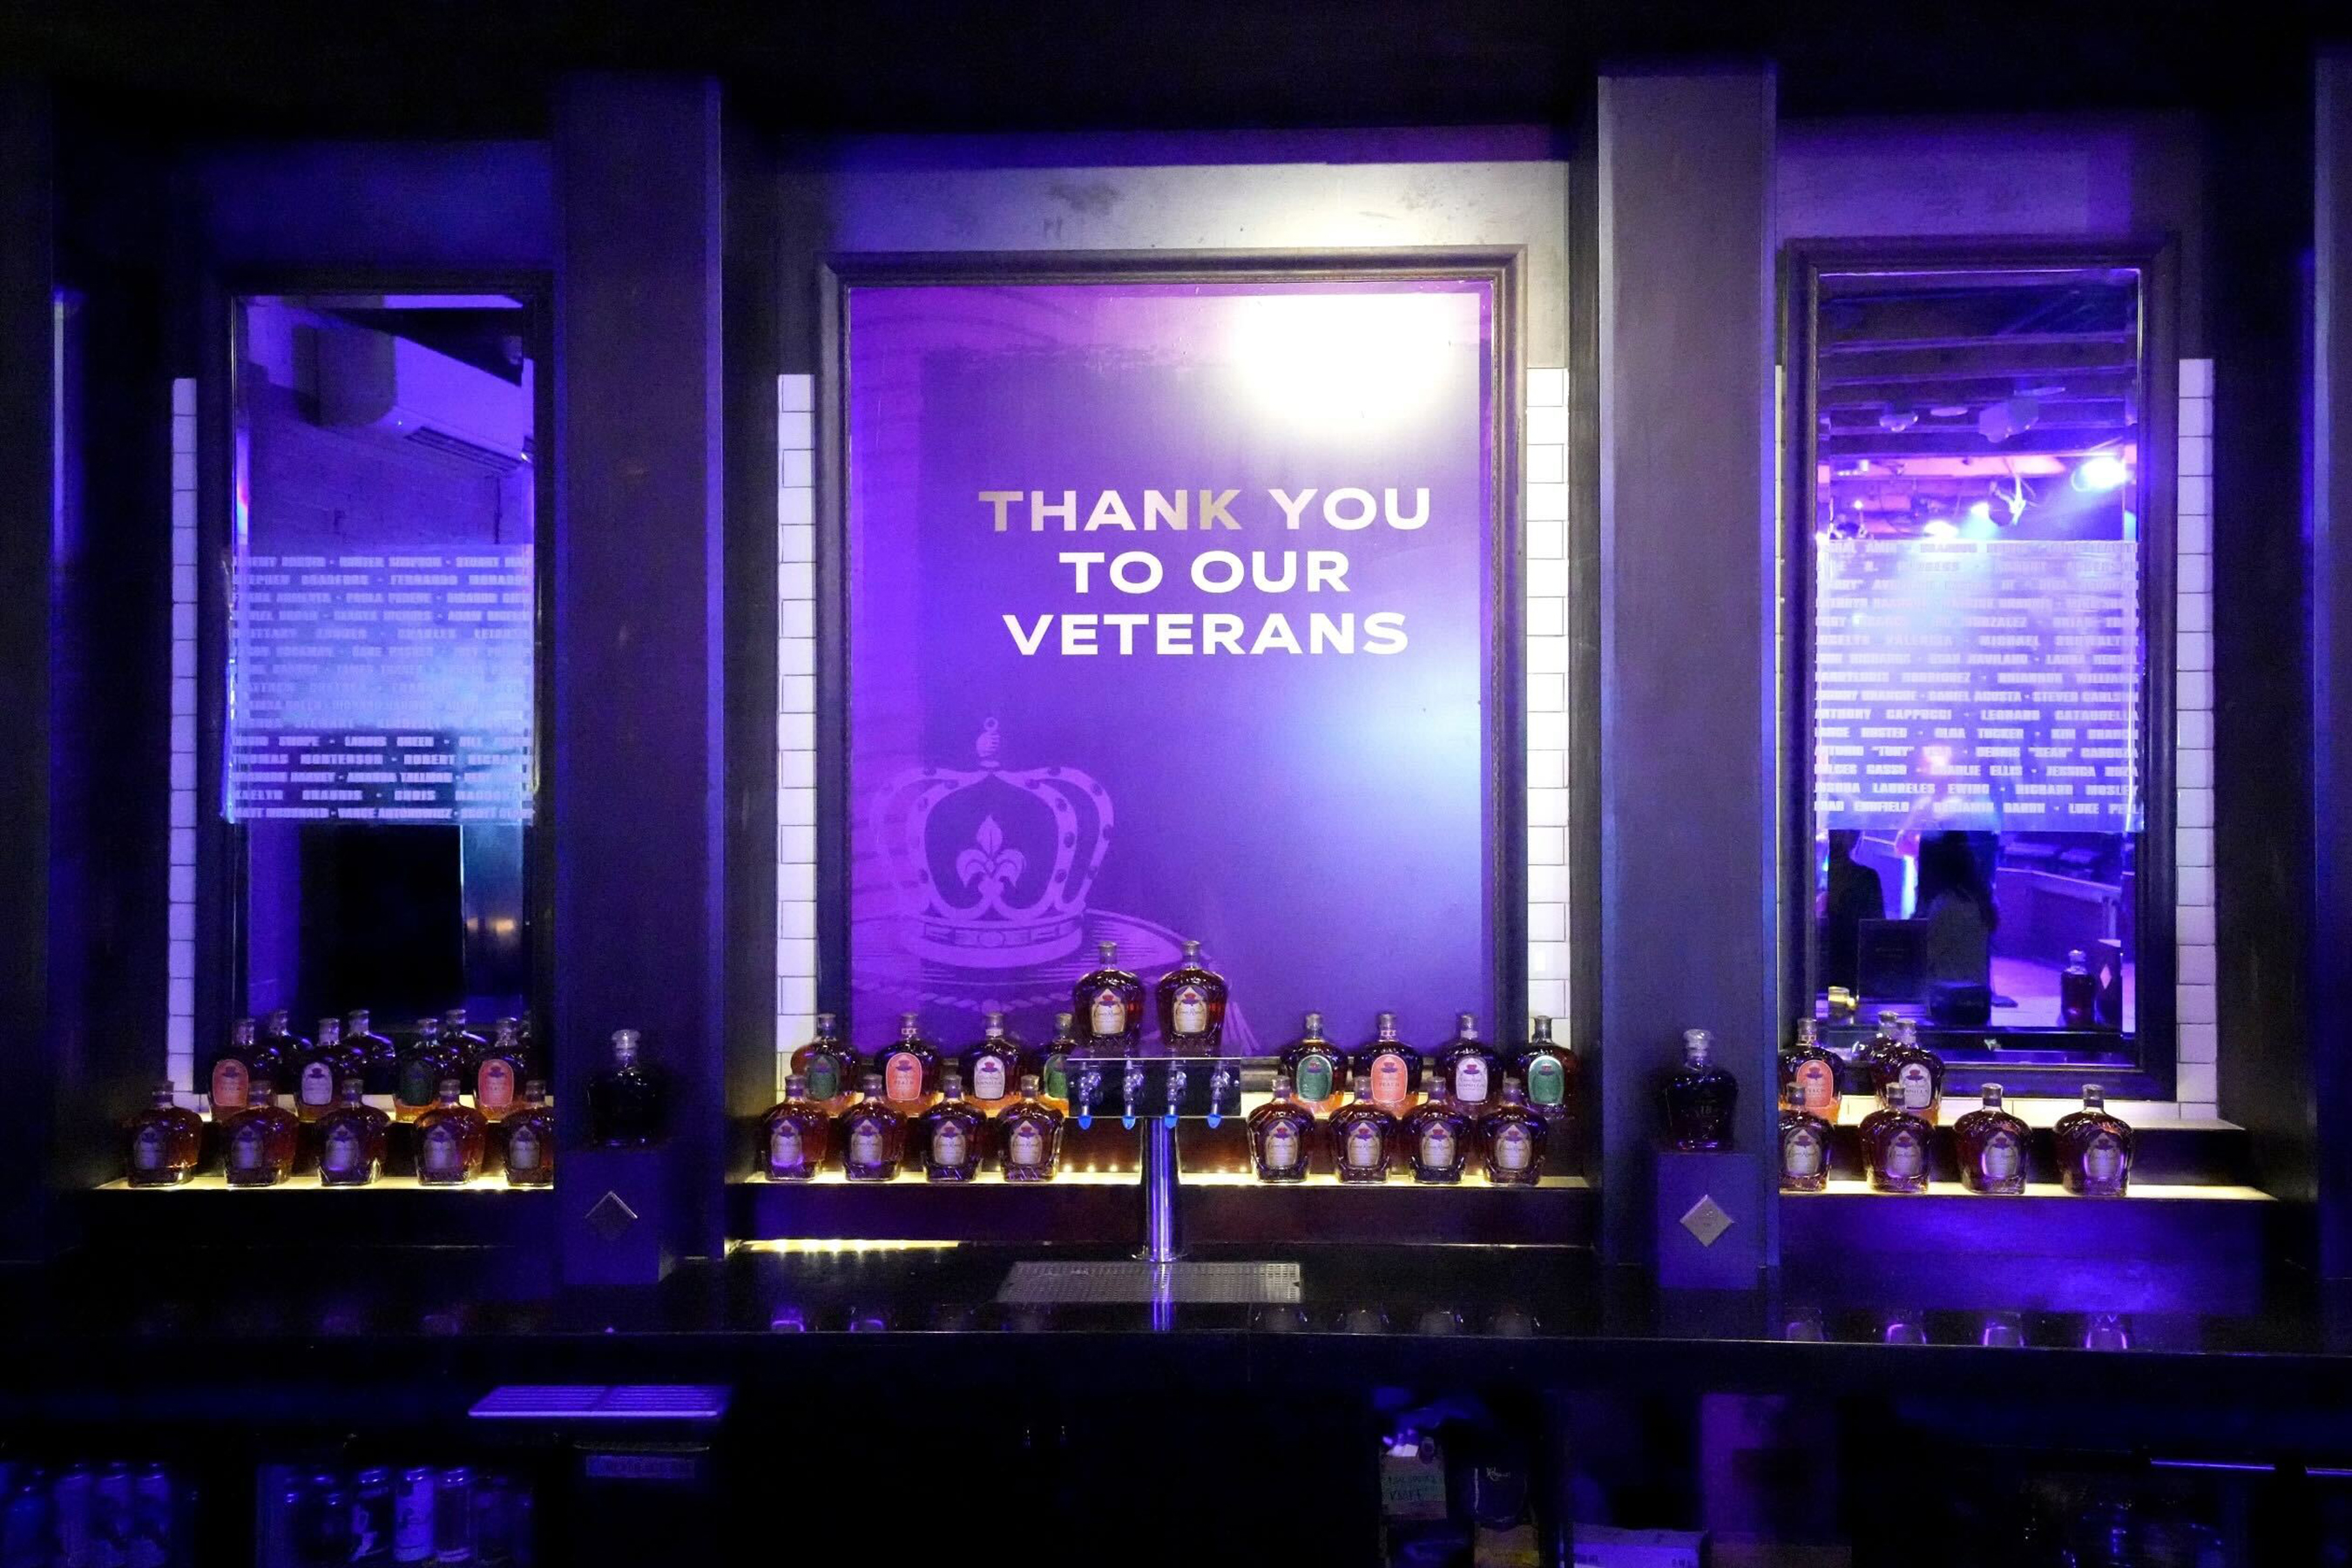 Crown Royal celebrated Super Bowl LVII by showcasing their gratitude for military veterans with an exclusive pre-game party experience featuring a rare acoustic set from Dave Grohl.